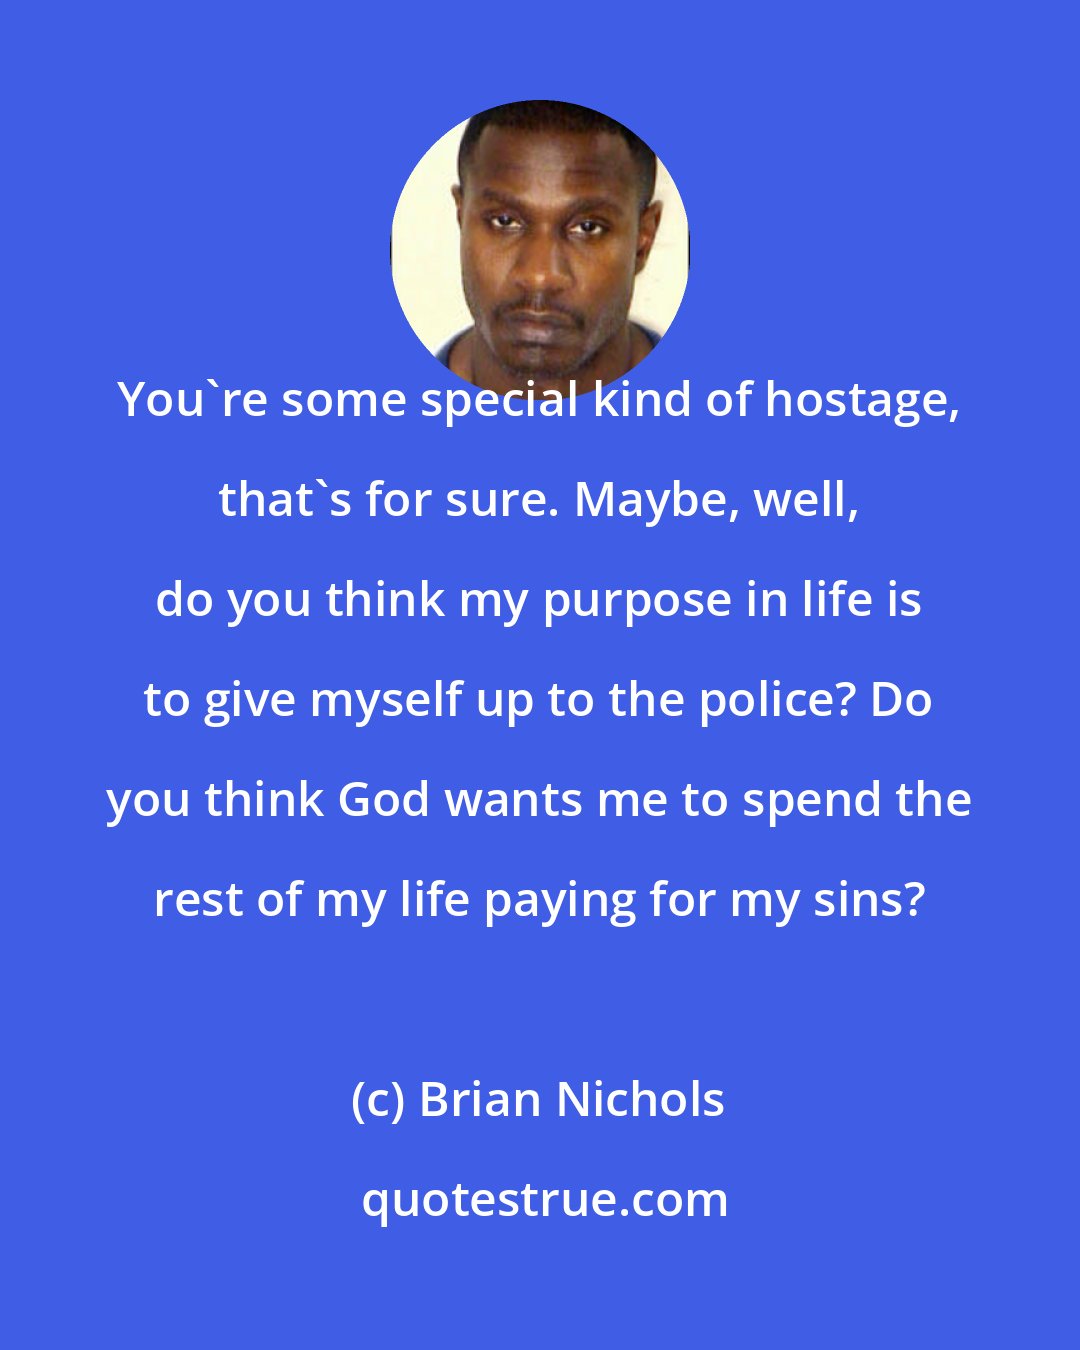 Brian Nichols: You're some special kind of hostage, that's for sure. Maybe, well, do you think my purpose in life is to give myself up to the police? Do you think God wants me to spend the rest of my life paying for my sins?